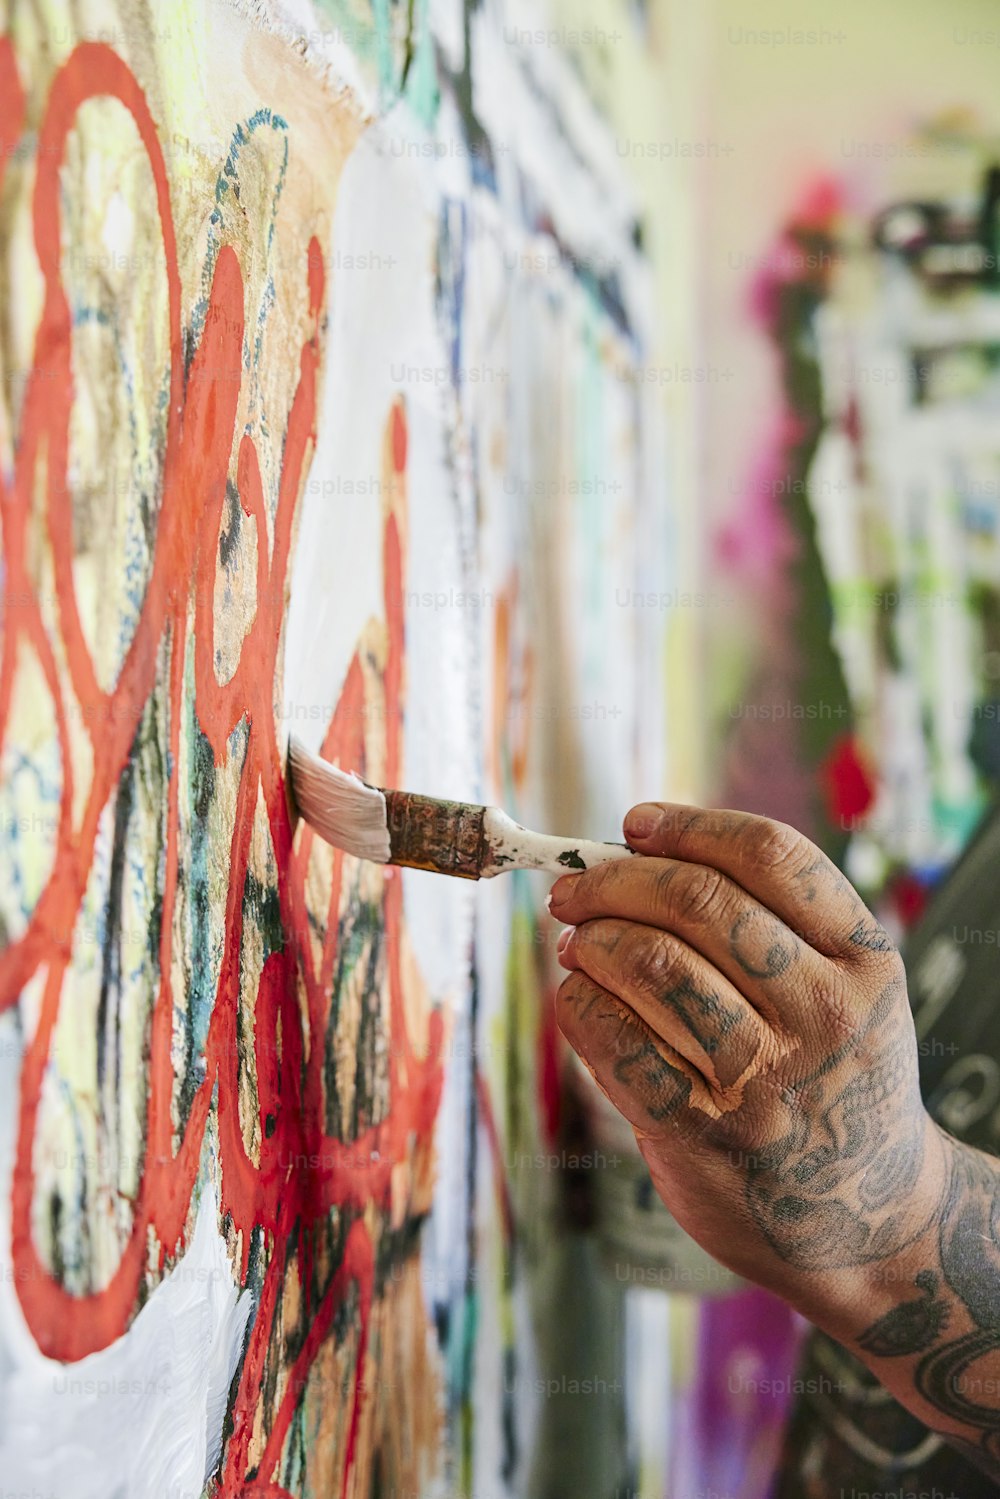 a man holding a paintbrush and painting on a wall